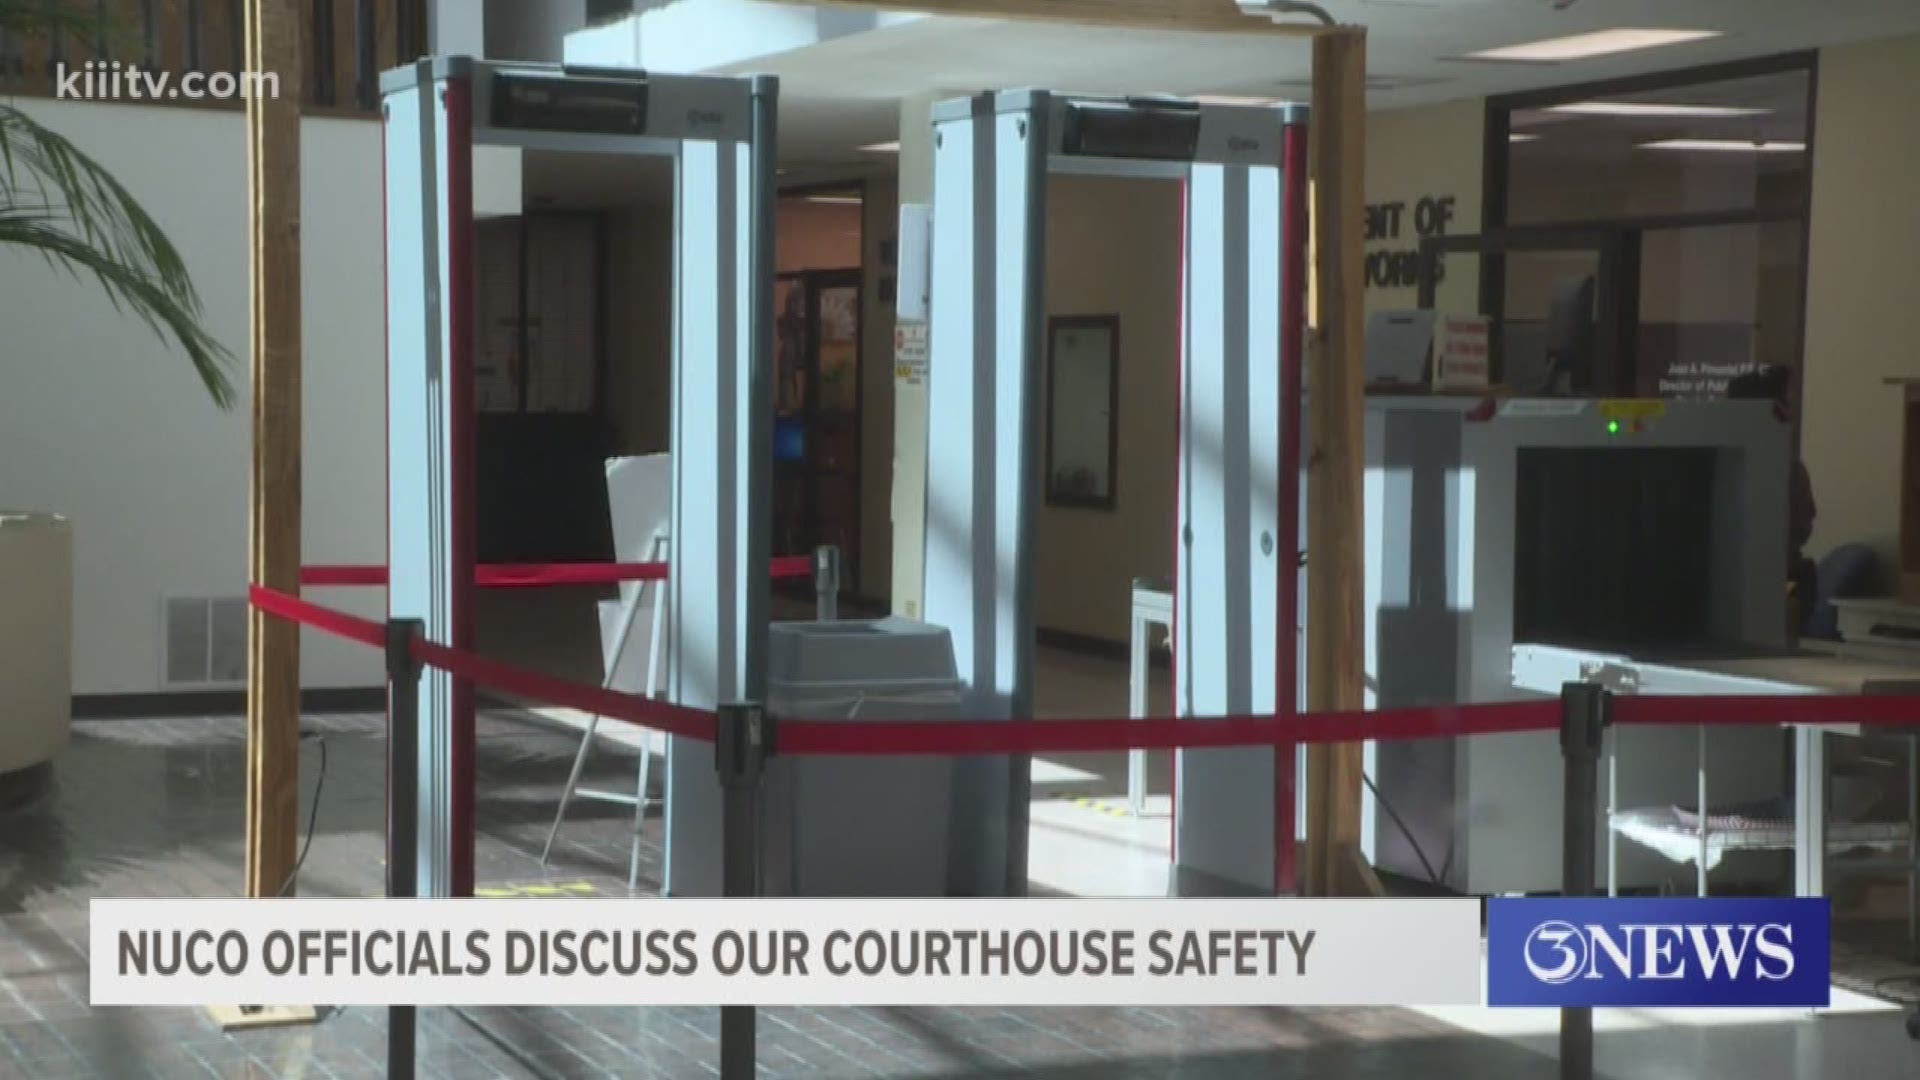 After two high-profile shootings this month involving public buildings, some Nueces County officials are pushing harder for upgraded security at the county courthouse and other public buildings.